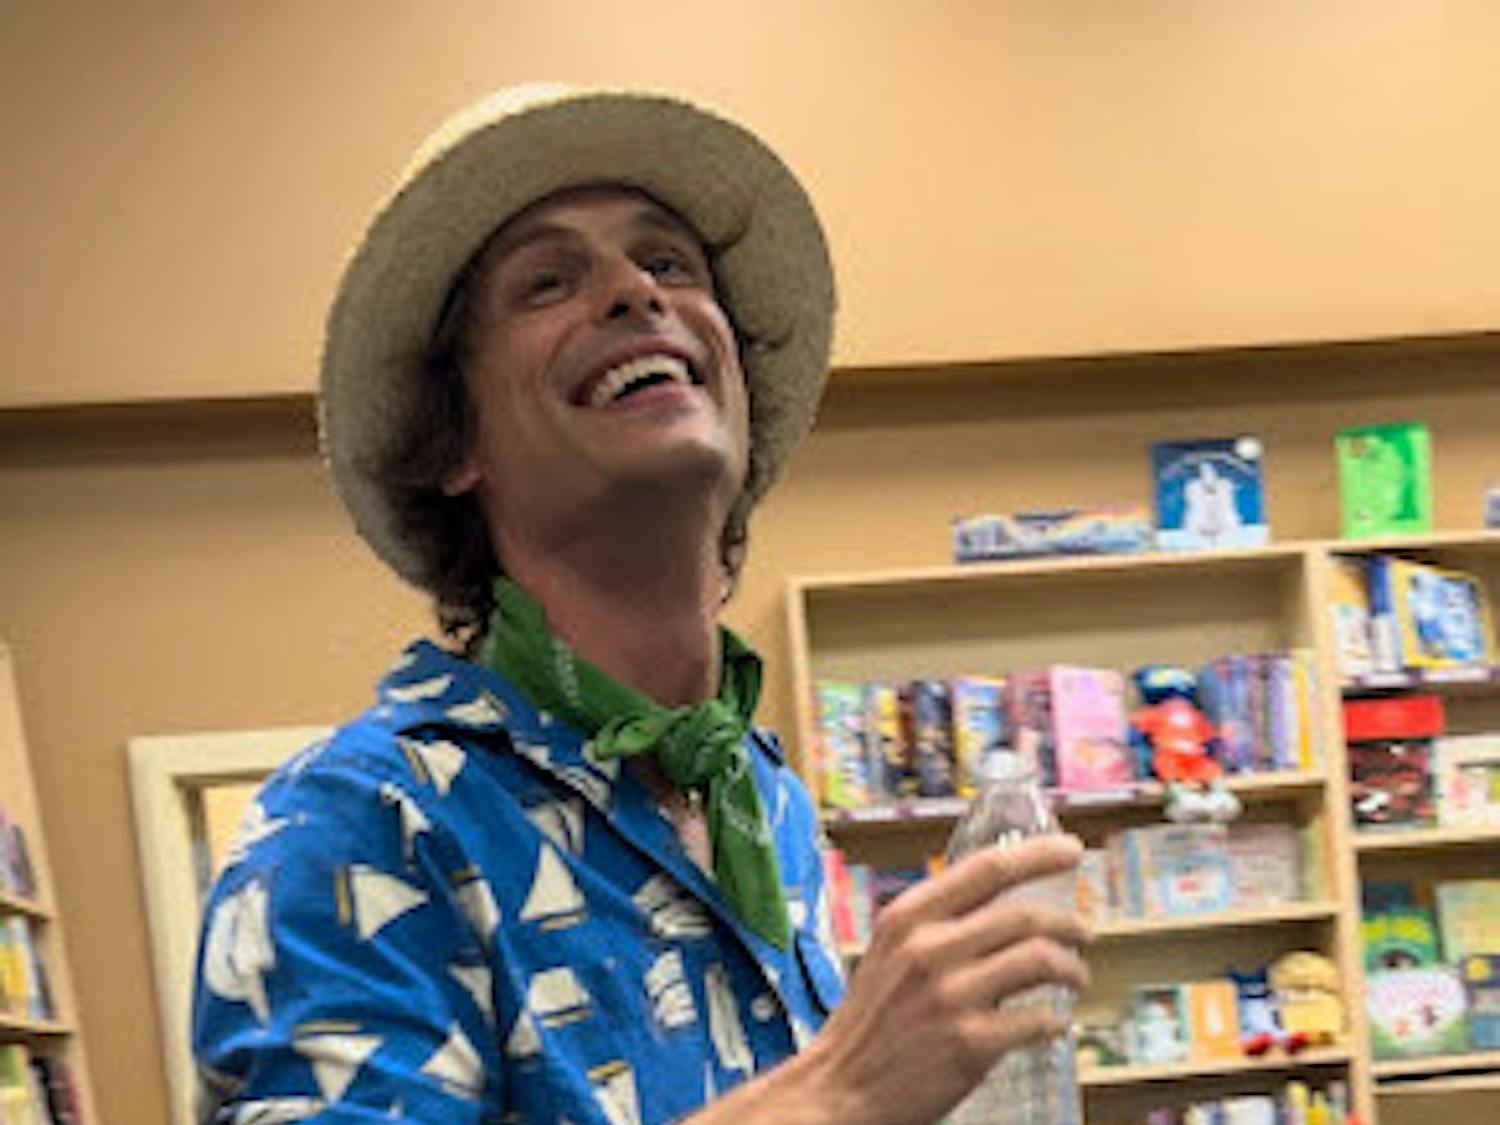 Gubler smiling at the fans in the bookstore (Photo courtesy of Giulia Campora).